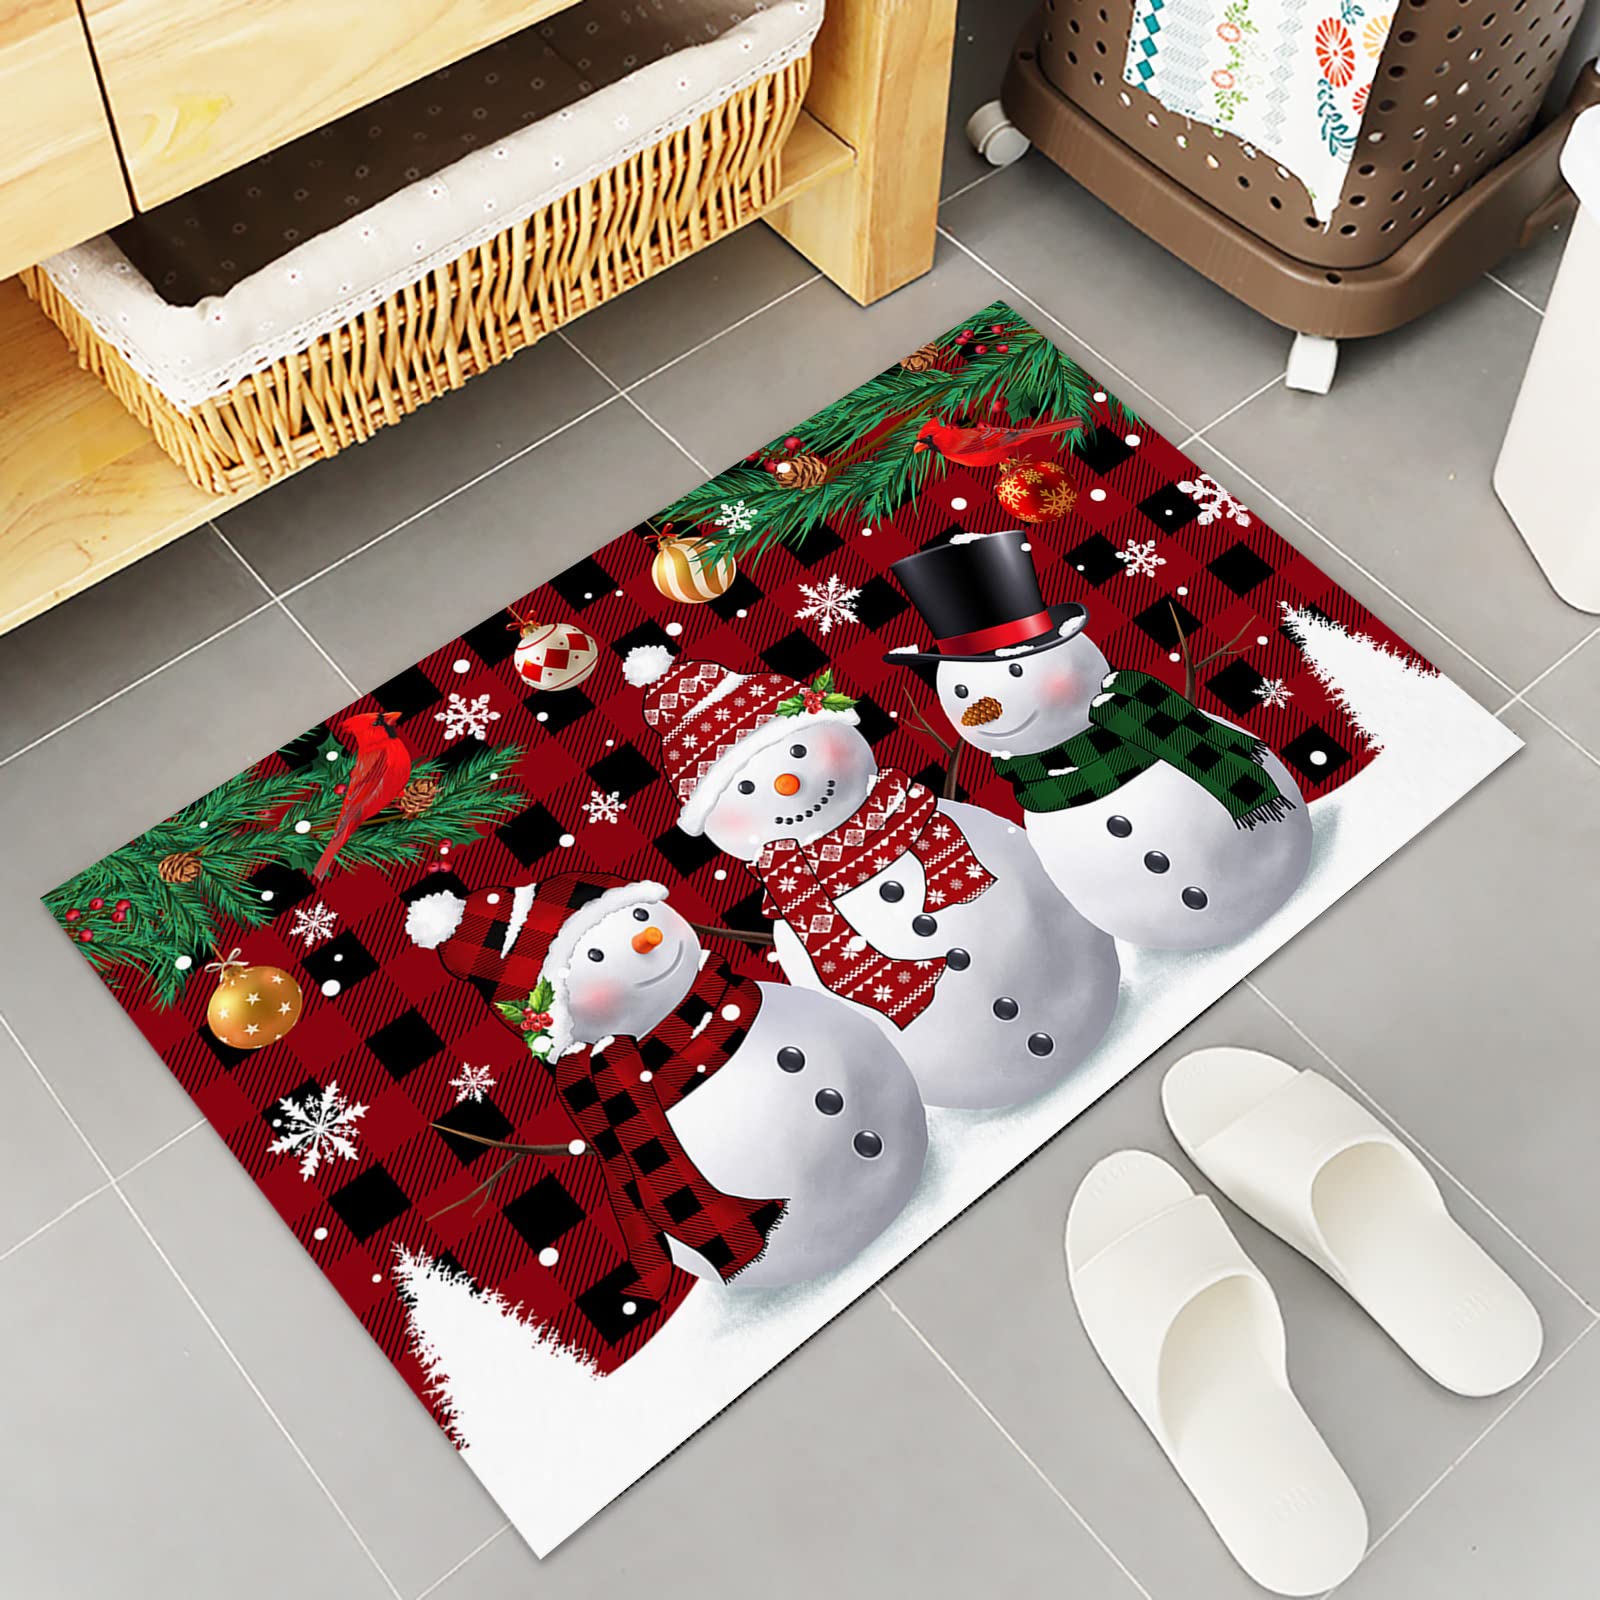 Christmas Kitchen Mats 2 Piece, Xmas Snowman Winter Holiday Doormats, Snowflake Kitchen Rugs Set Black Red Buffalo Plaid Christmas Decorations Floor Mat for Indoor Use,15.7" x 23.6"+15.7" x 47.2"